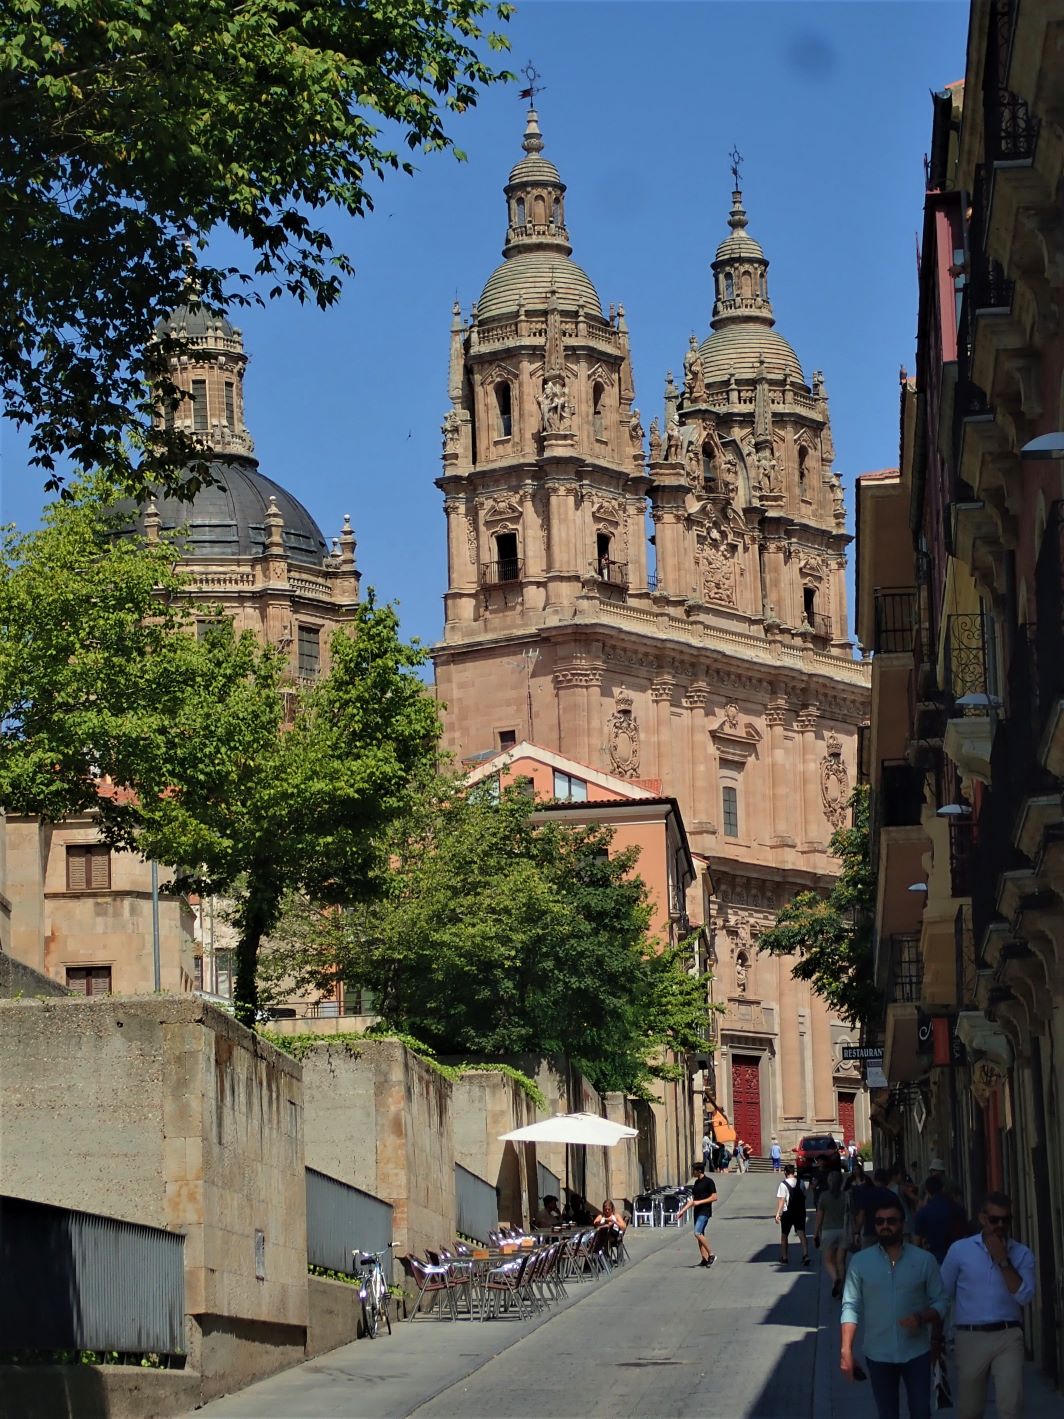 Admire the sandstone architecture along the streets of Salamanca, Spain